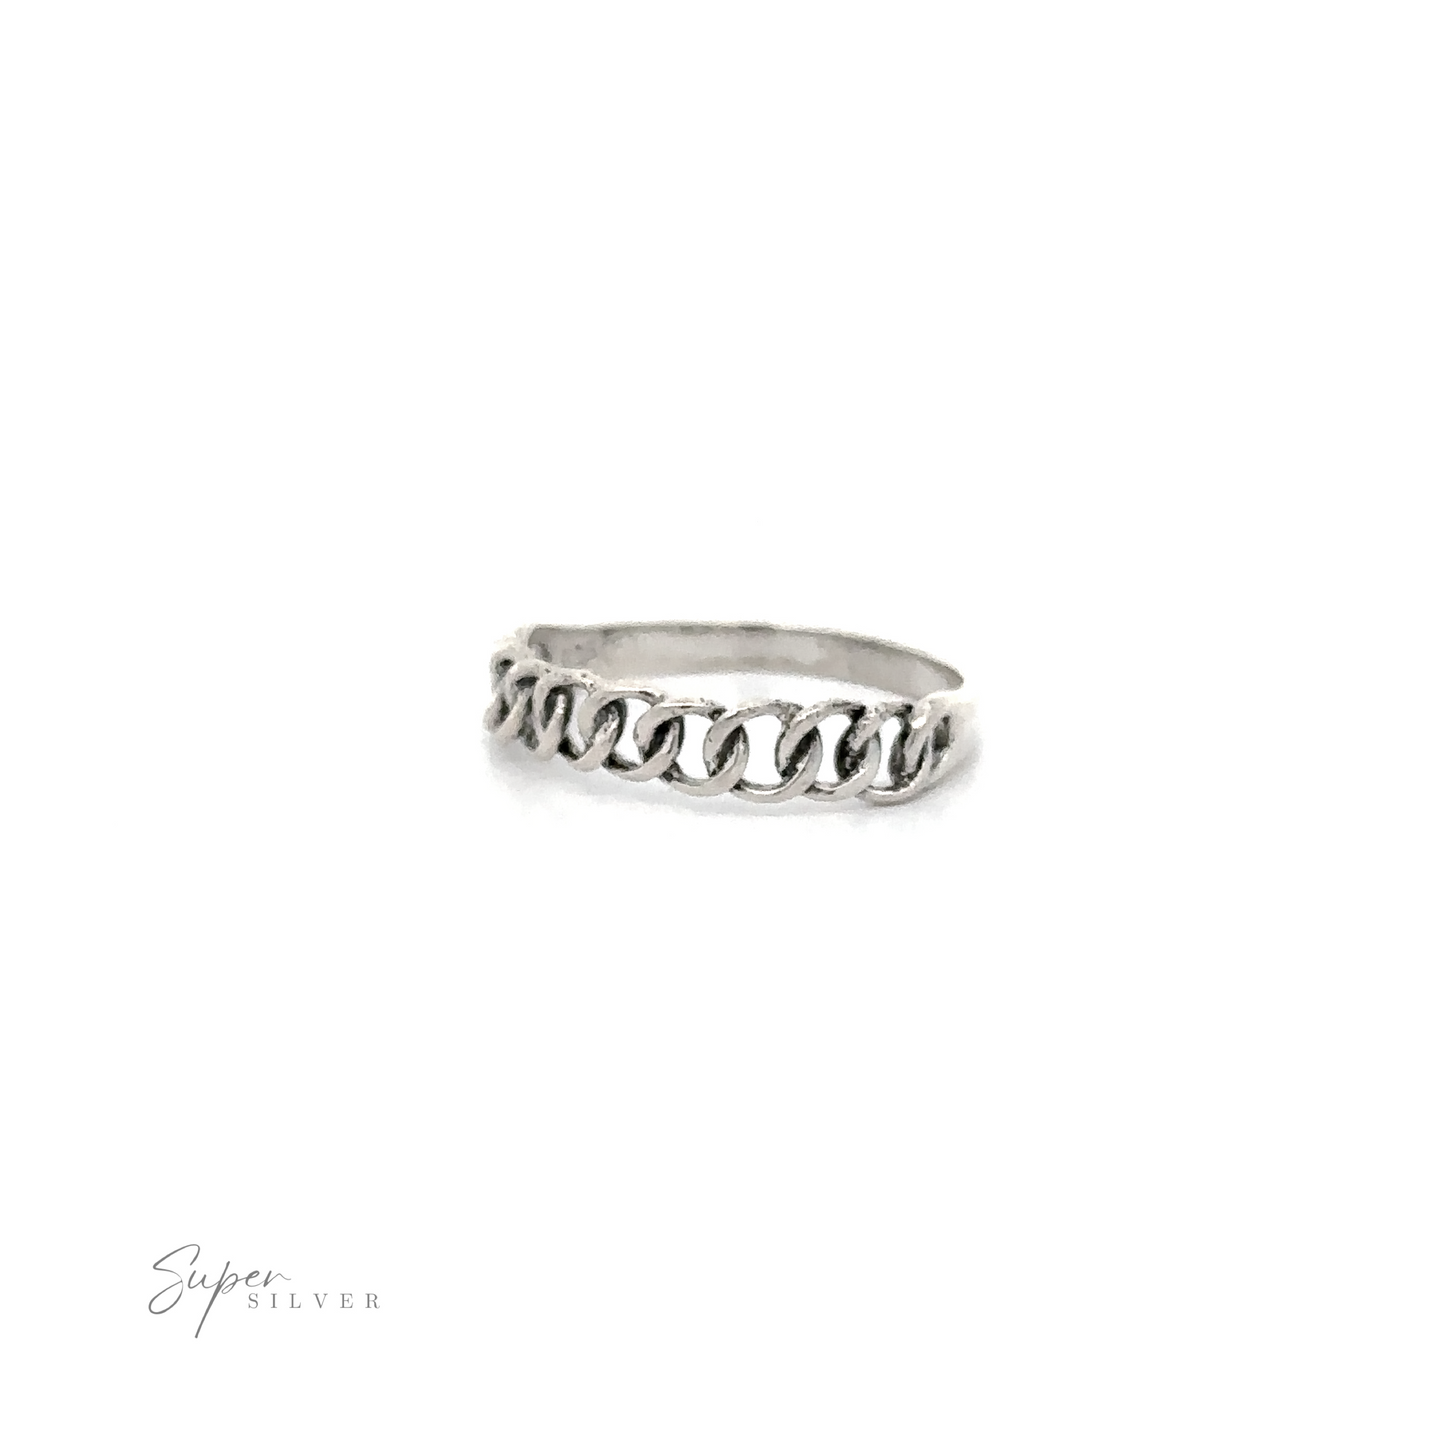 A stylish silver Chain Link Ring With Plain Band, perfect for everyday wear.